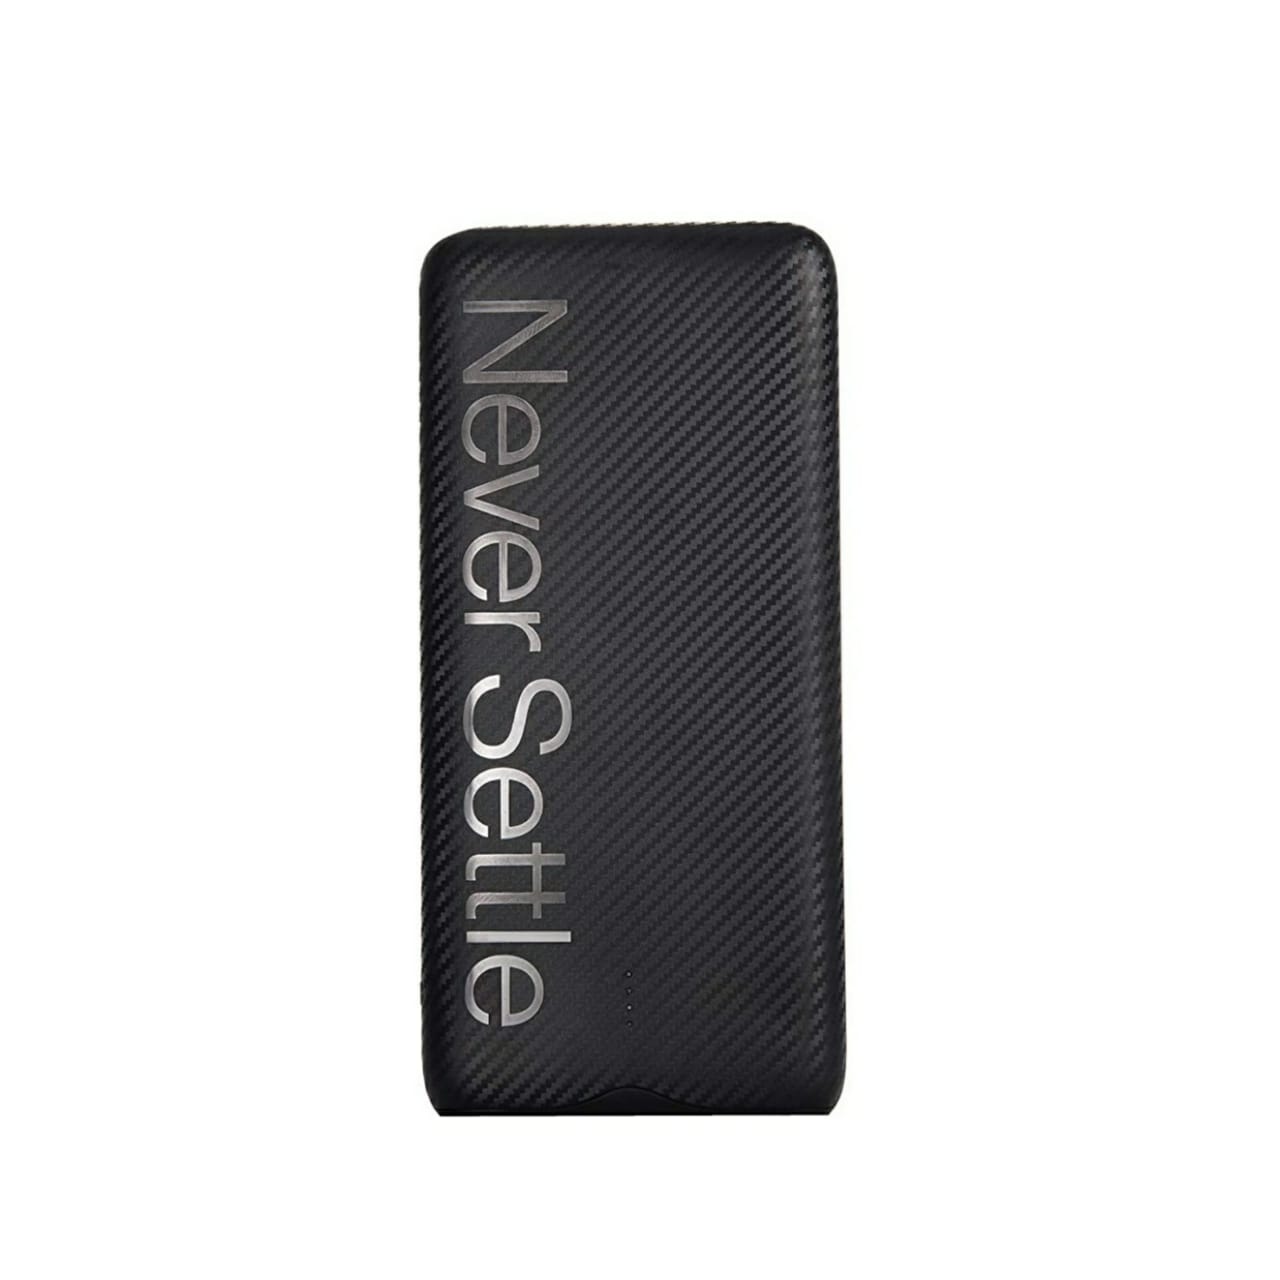 https://electromania.co.in/wp-content/uploads/2021/02/OnePlus-10000-mAh-Power-Bank-Fast-PD-Charging-18-W-Black-Lithium-Polymer-1.jpg